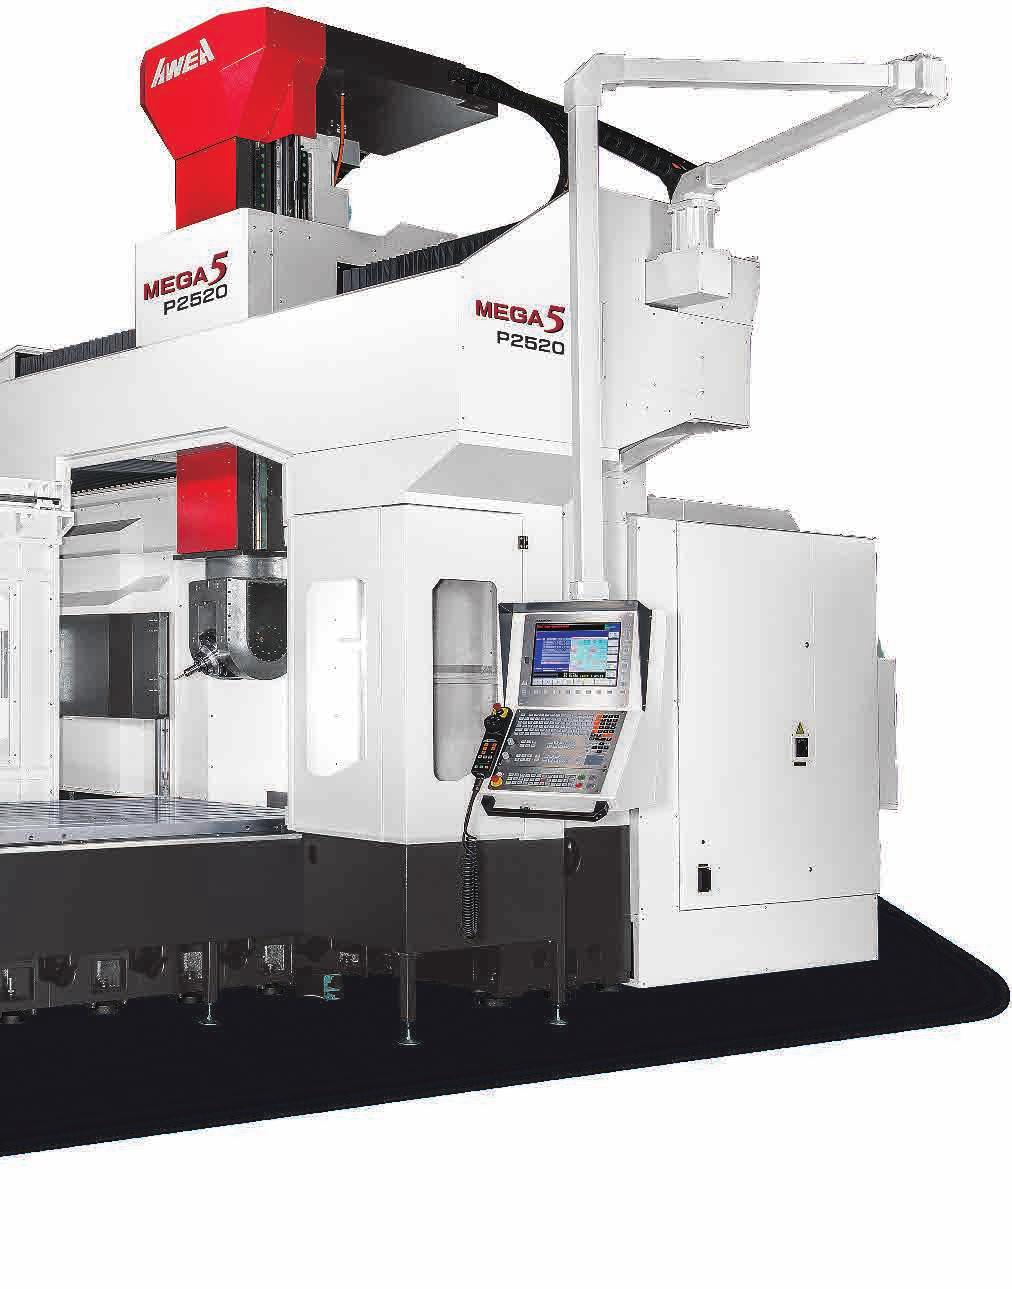 2,500 3,000 ~ 4,000 Z-axis travel mm 1,000 / 1,200 1,200 / 1,400 Table load capacity